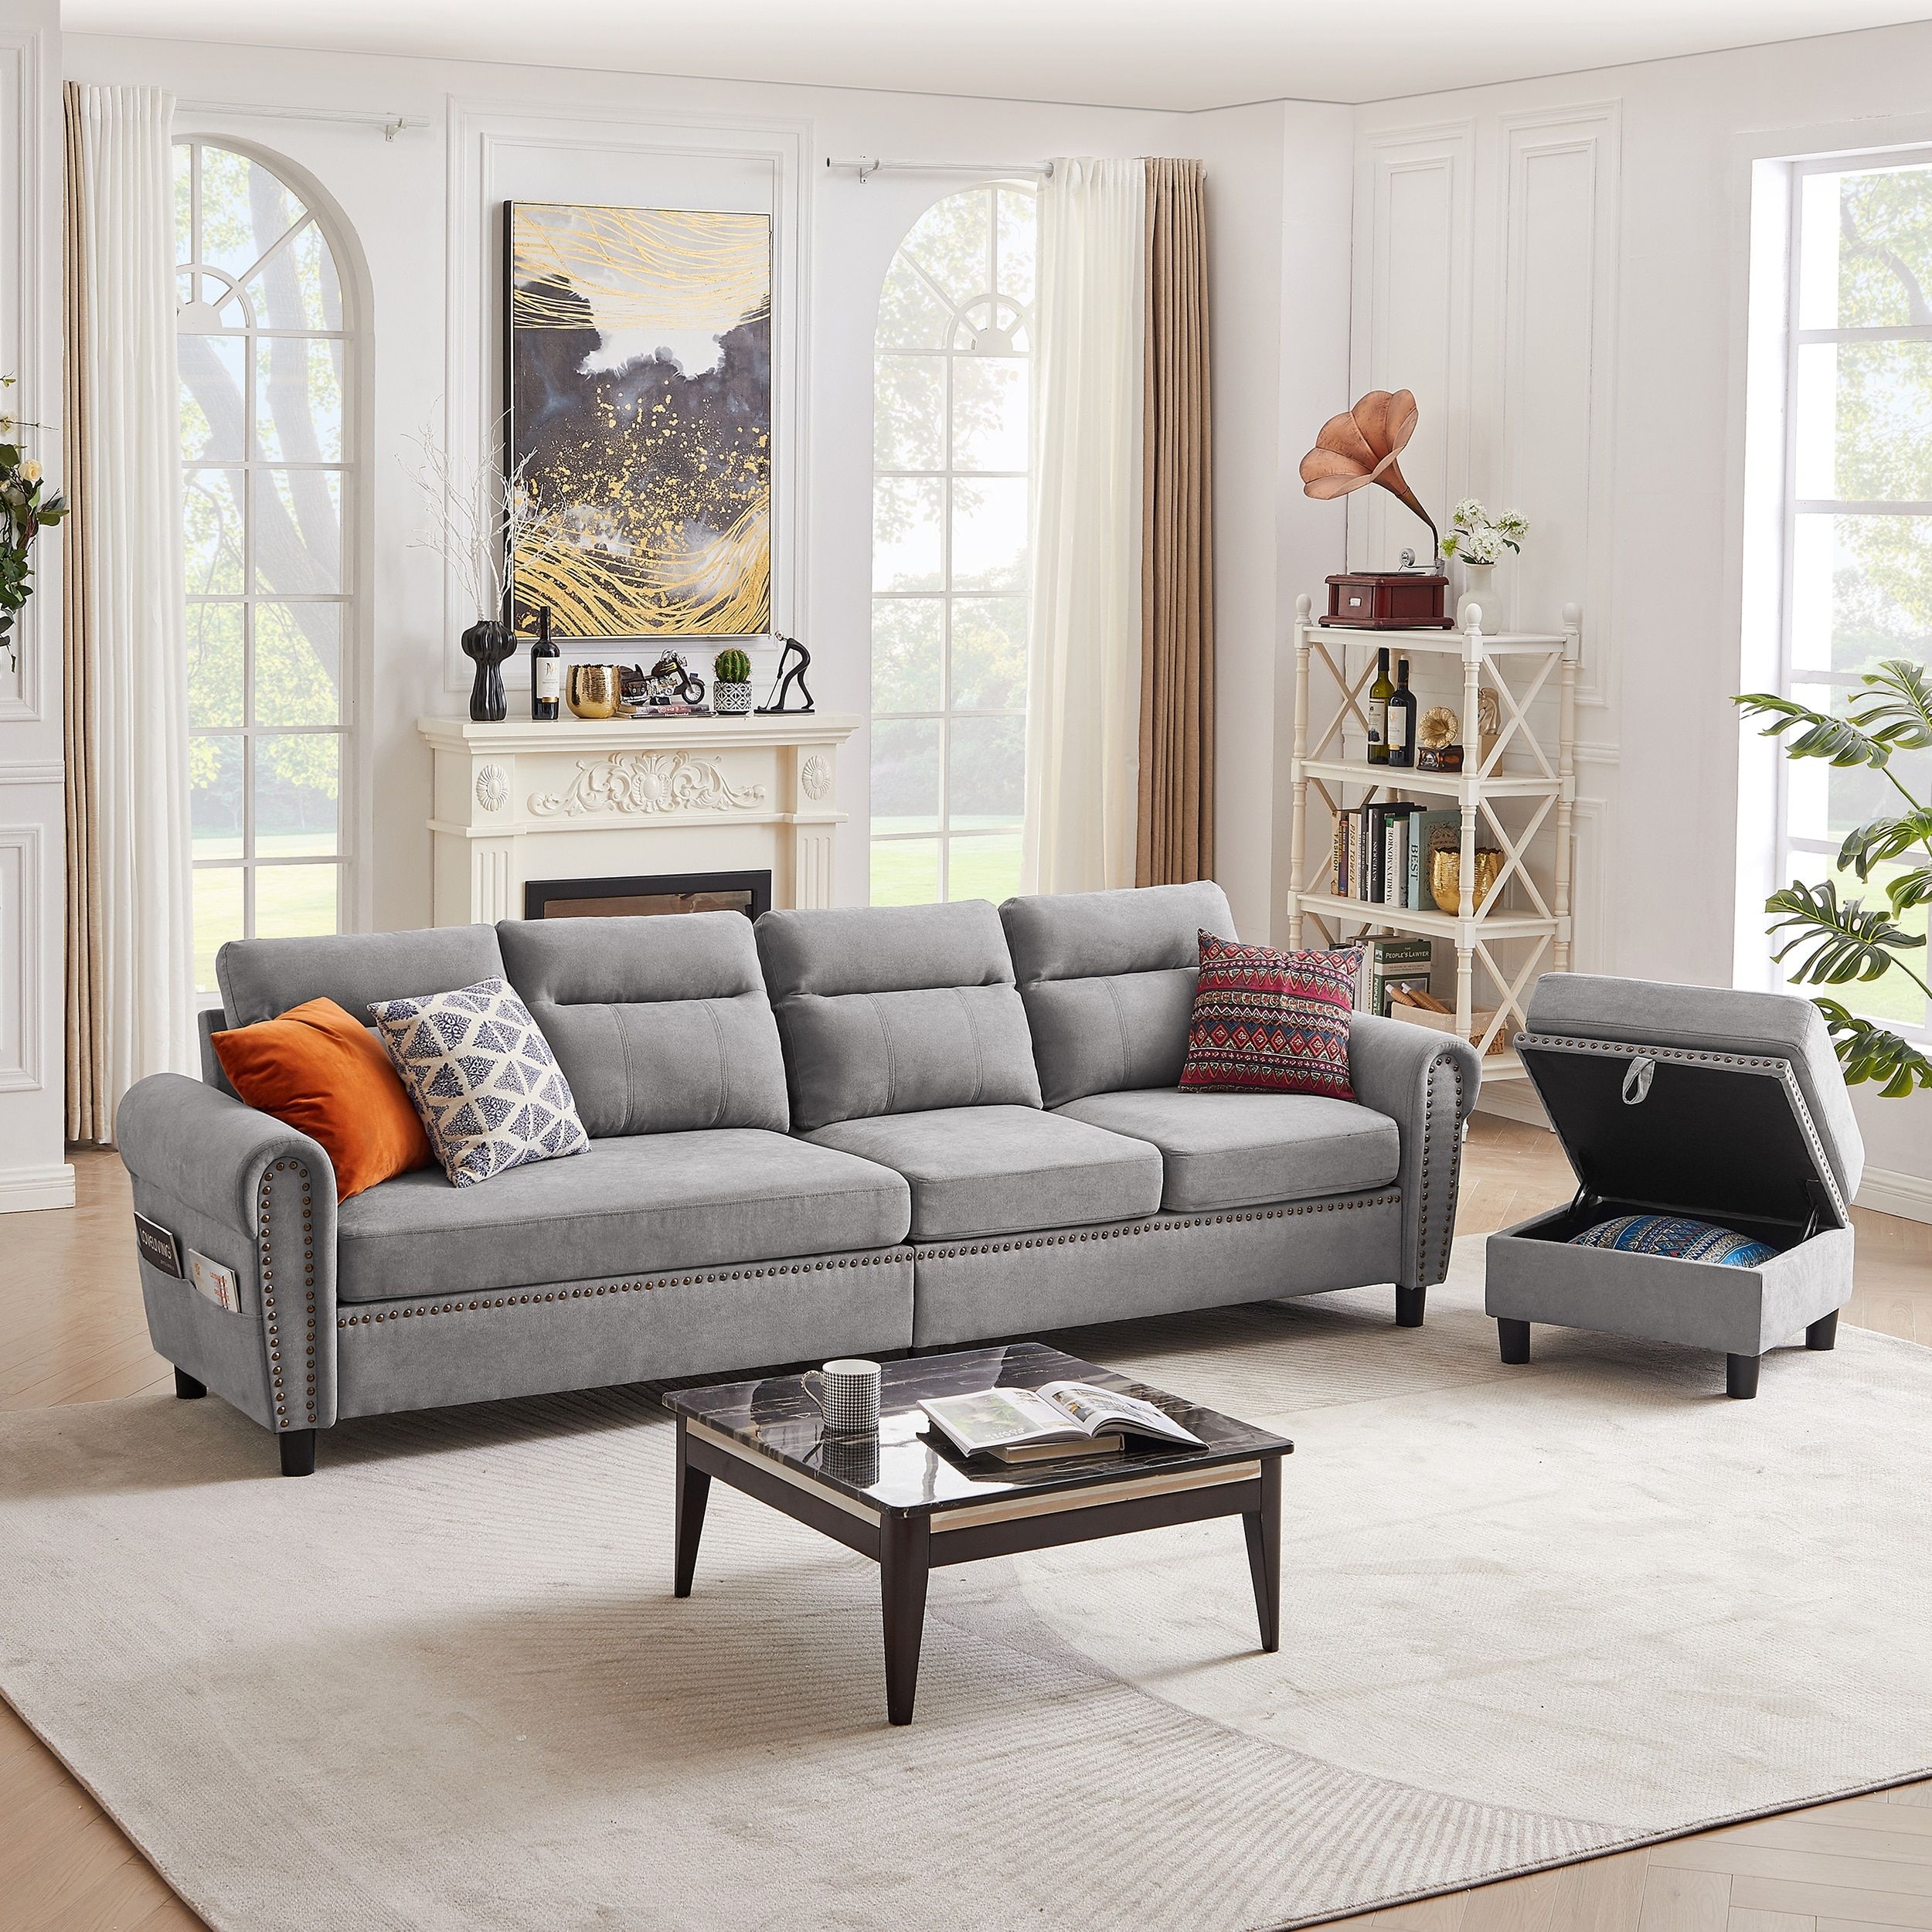 4 Seater L Shaped Reversible Sectional Sofa With Storage Ottoman – Bed Bath  & Beyond – 37992798 Intended For Reversible Sectional Sofas (Photo 3 of 15)